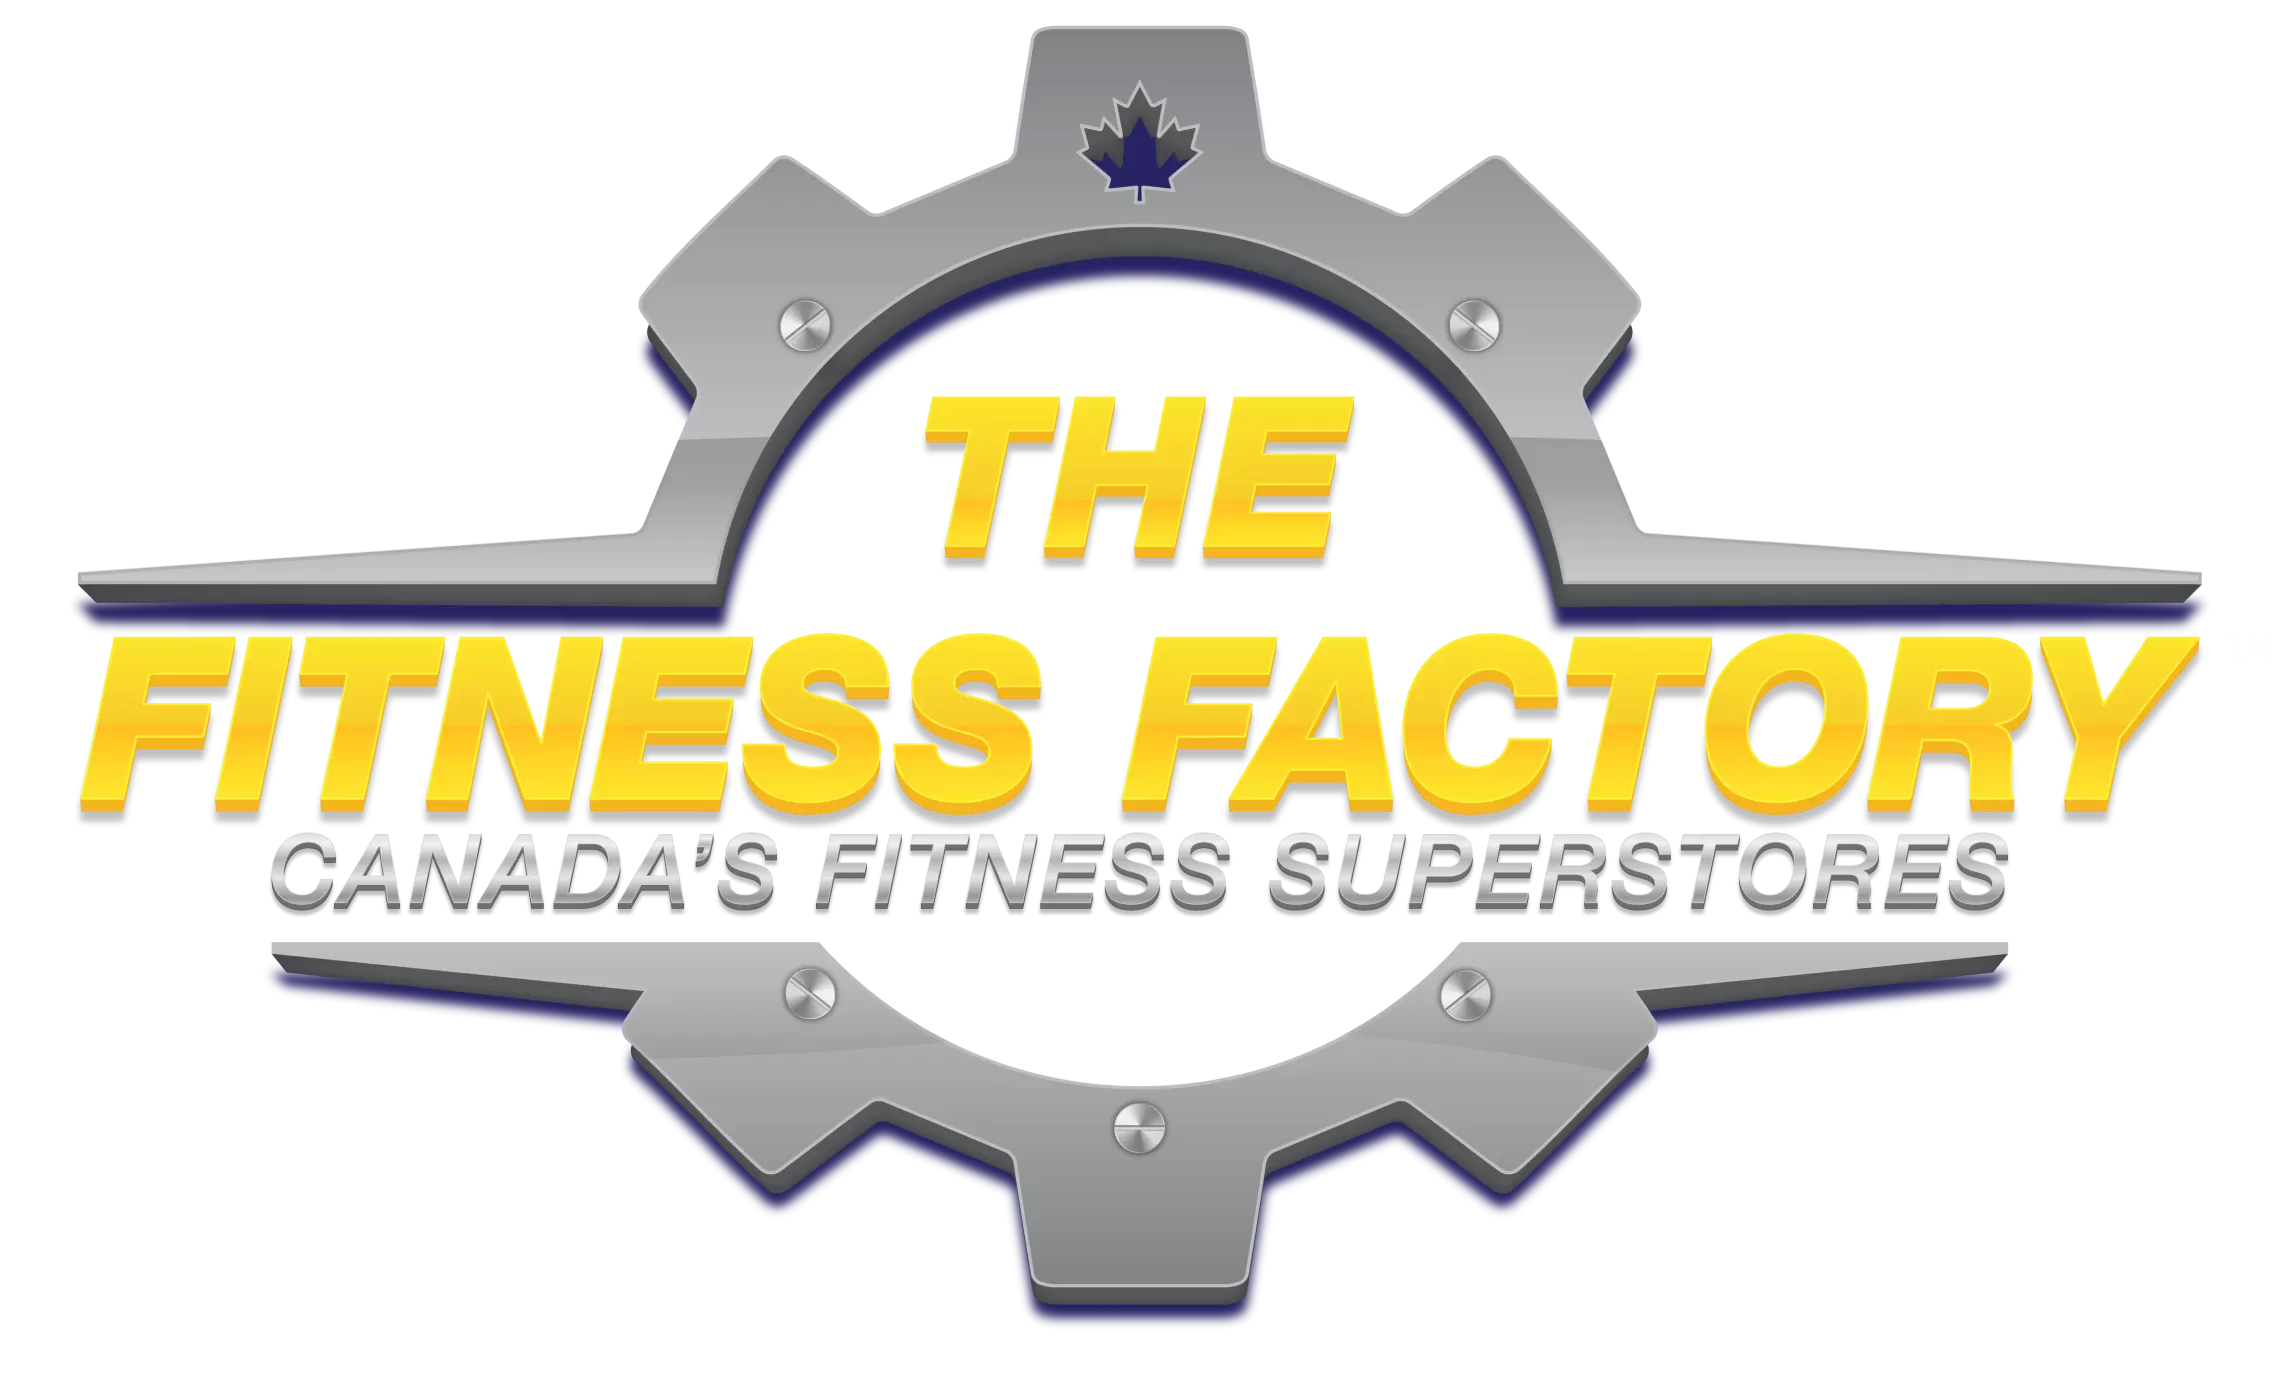 The fitness factory logo